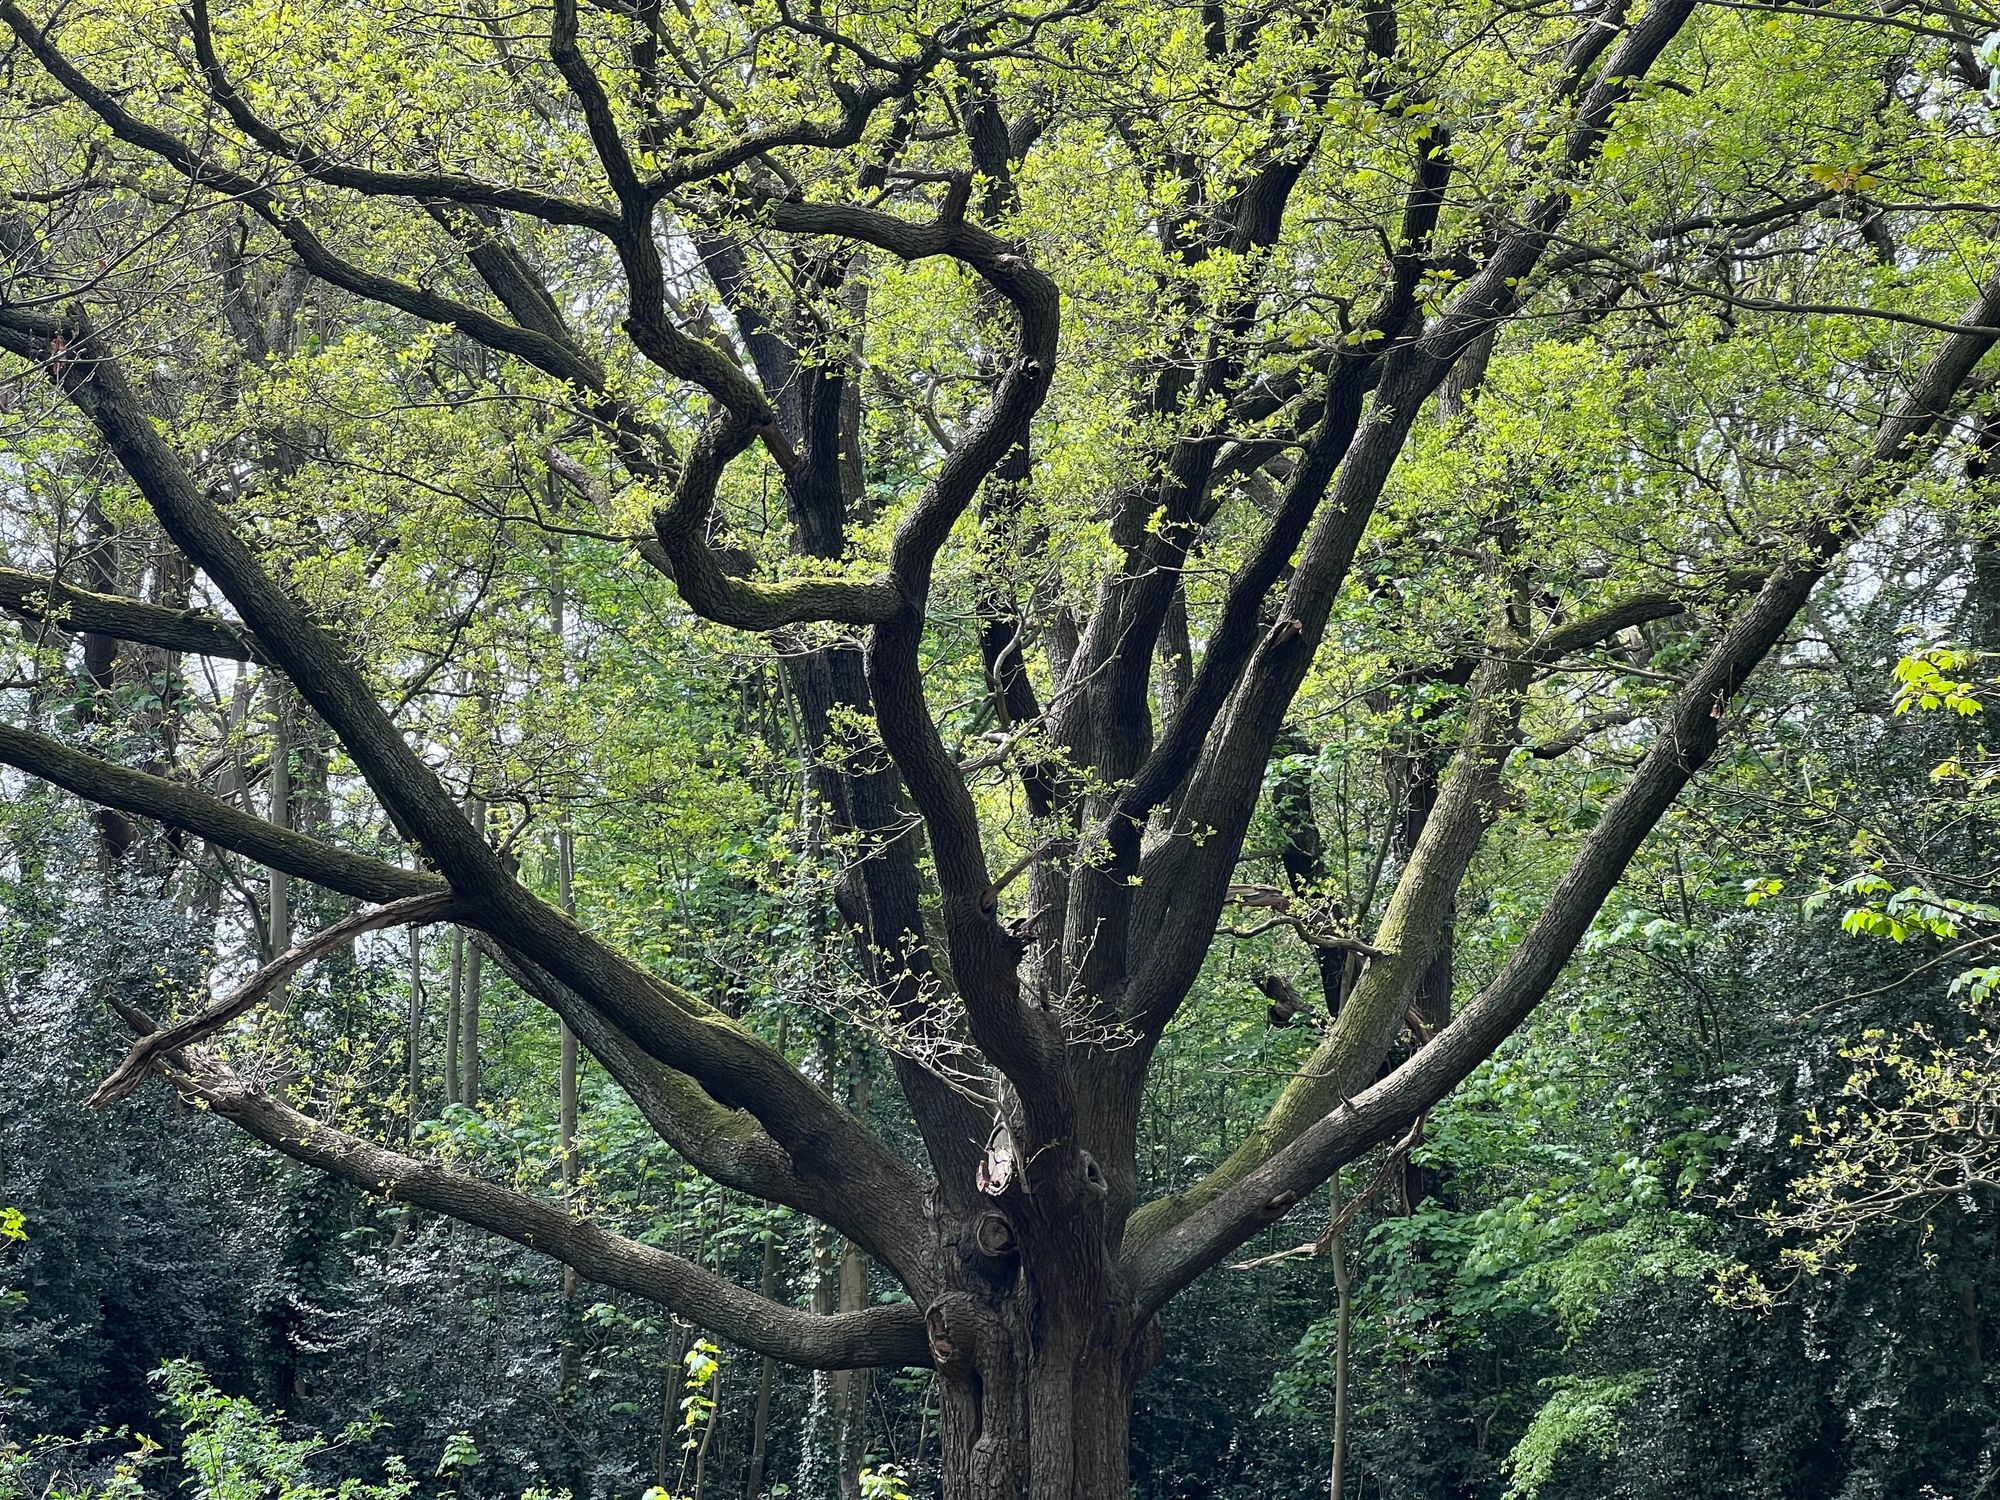 A large deciduous tree with thick, bare branches reaching for the canopy, and some new growth on some more slender branches.